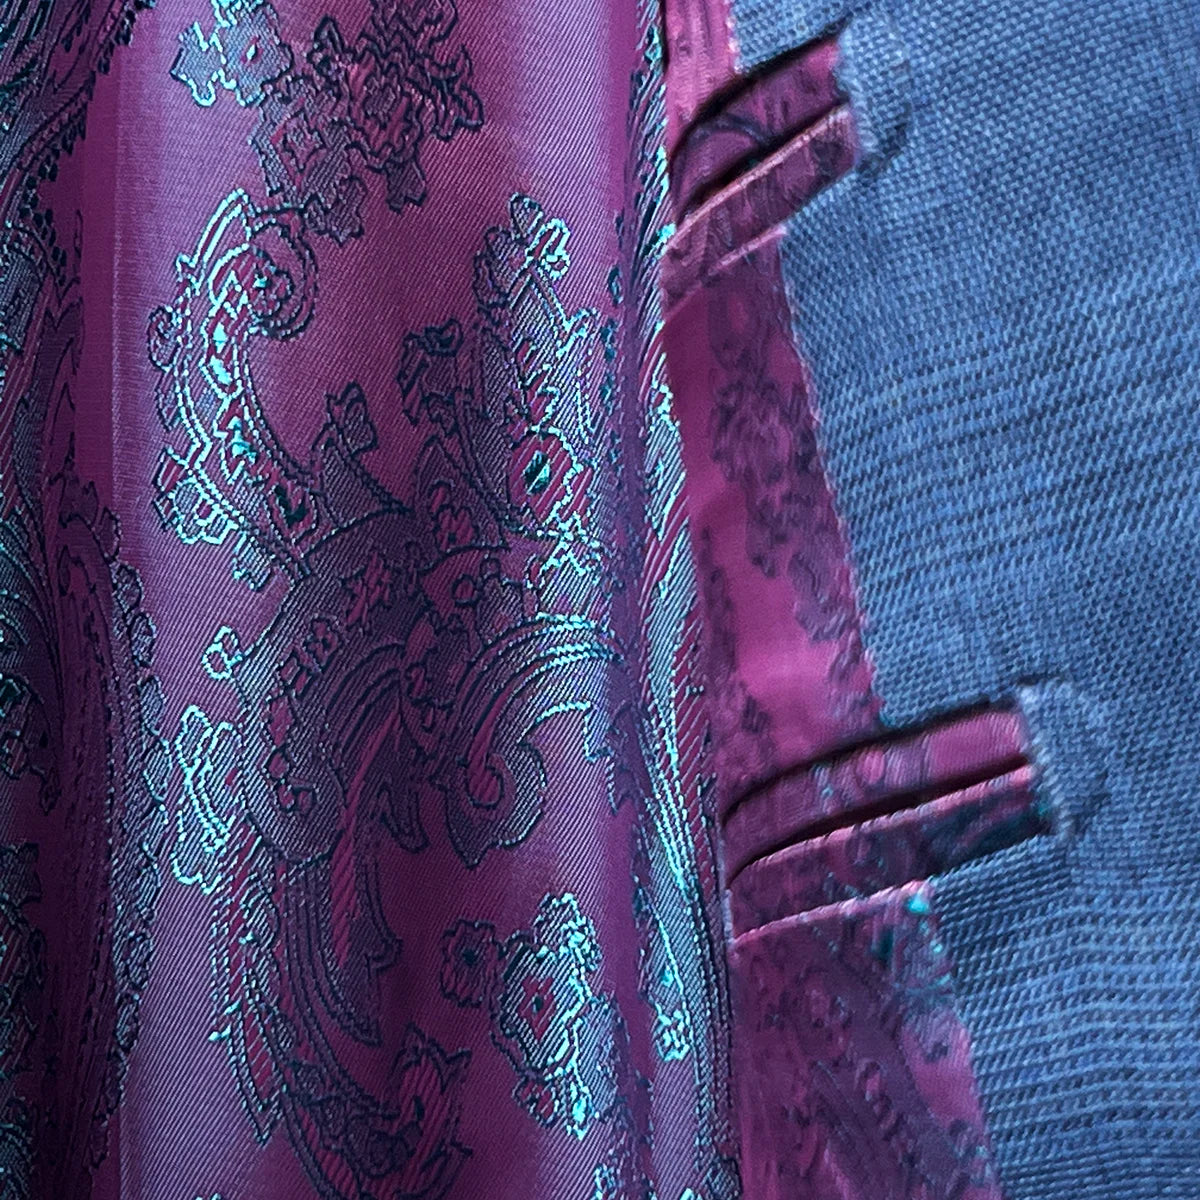 View of the flash linings inside the suit jacket, highlighting the vibrant paisley pattern.